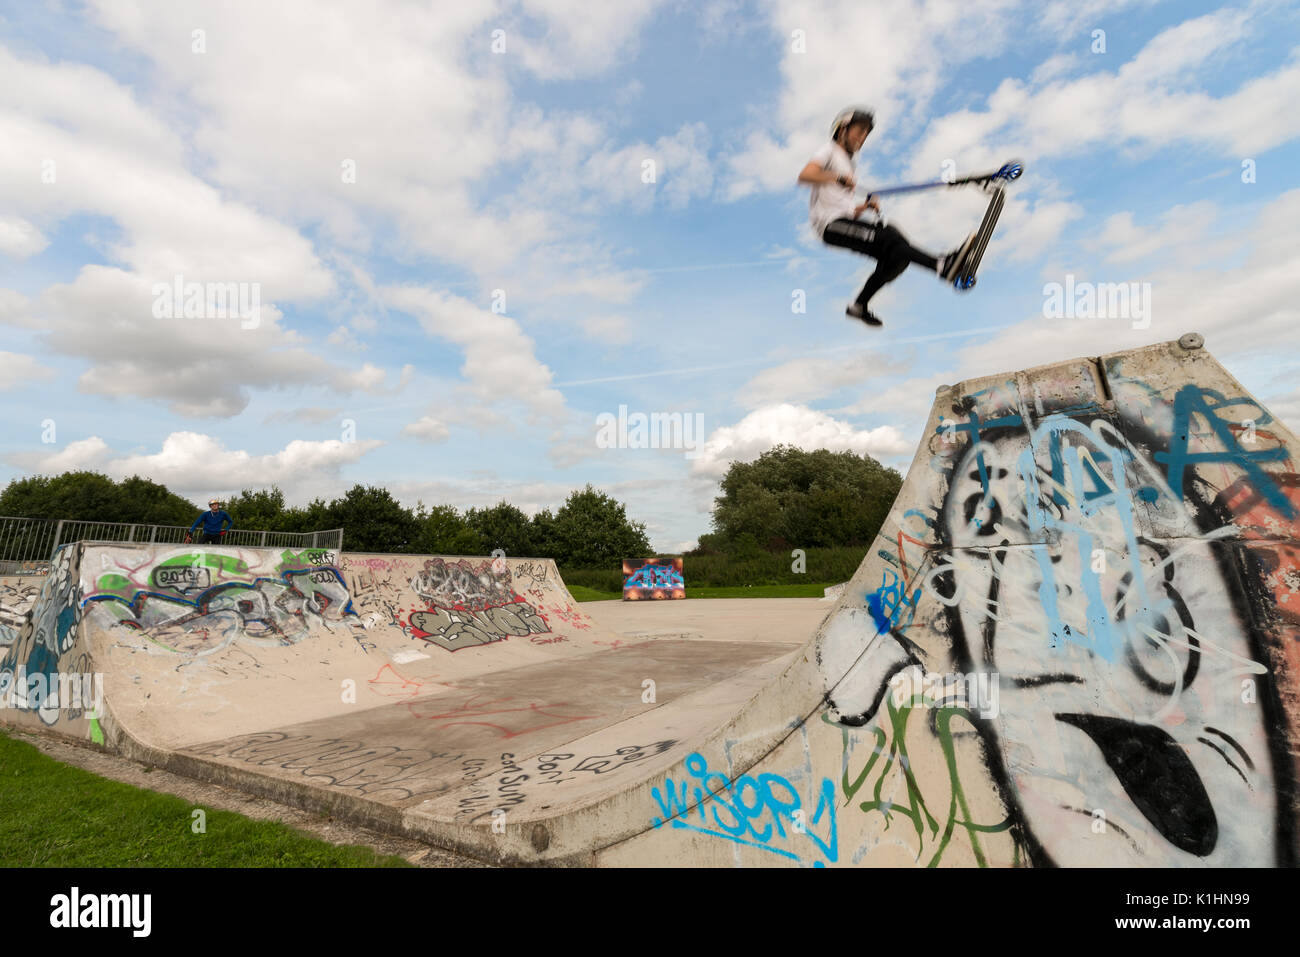 A teenager on a scooter does a jump trick on a concrete half pipe ramp at Stratford on Avon skate park during the summer holidays. Stock Photo